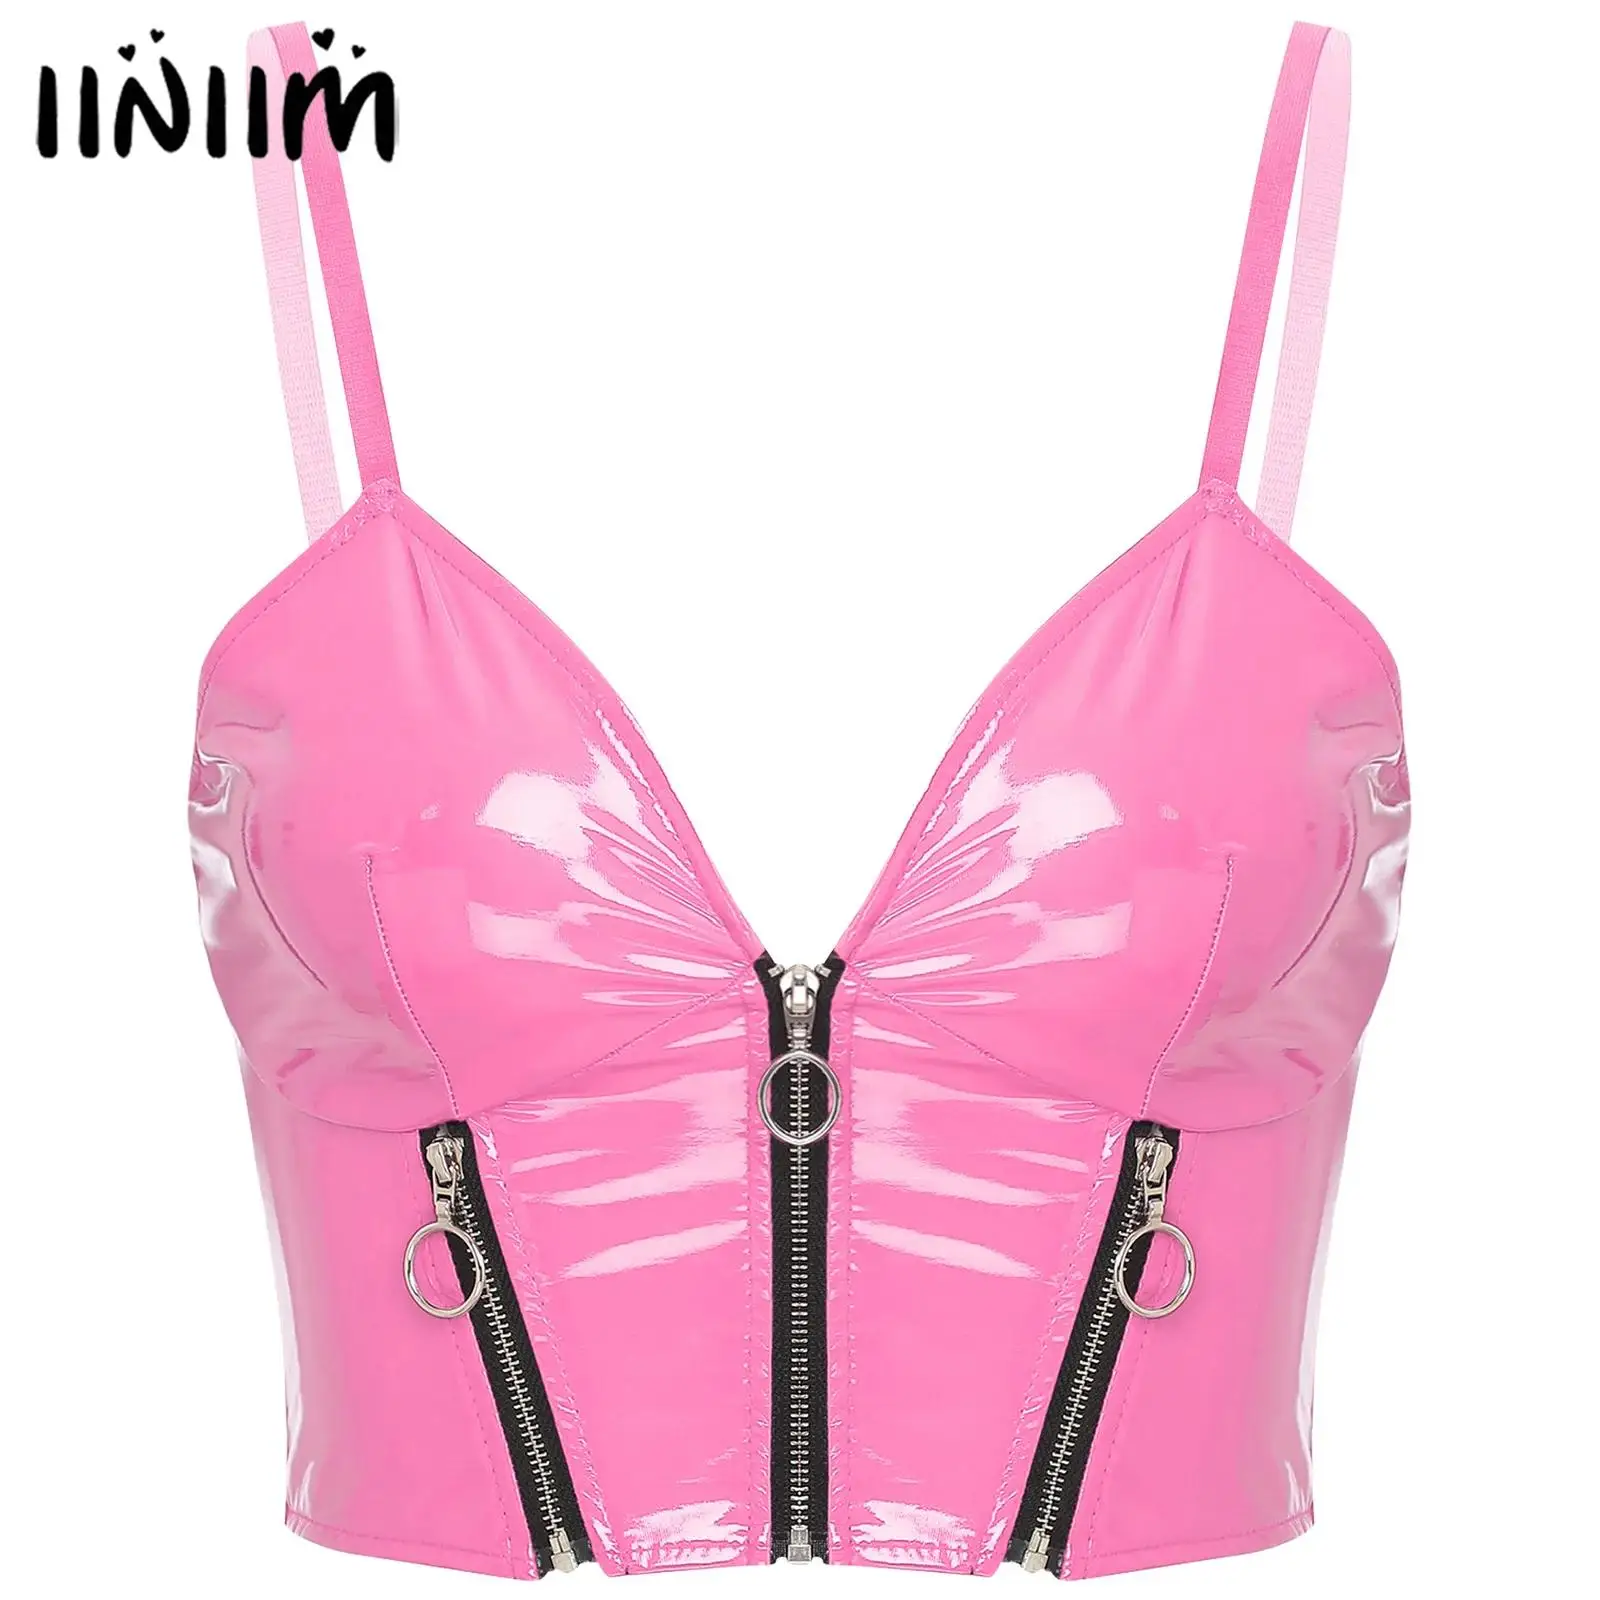 

Womens Front Zipper Backless Sling Vest Crop Tops Slim Fit Sexy Camisole Rave Party Costume Glossy Patent Leather Tops Clubwear